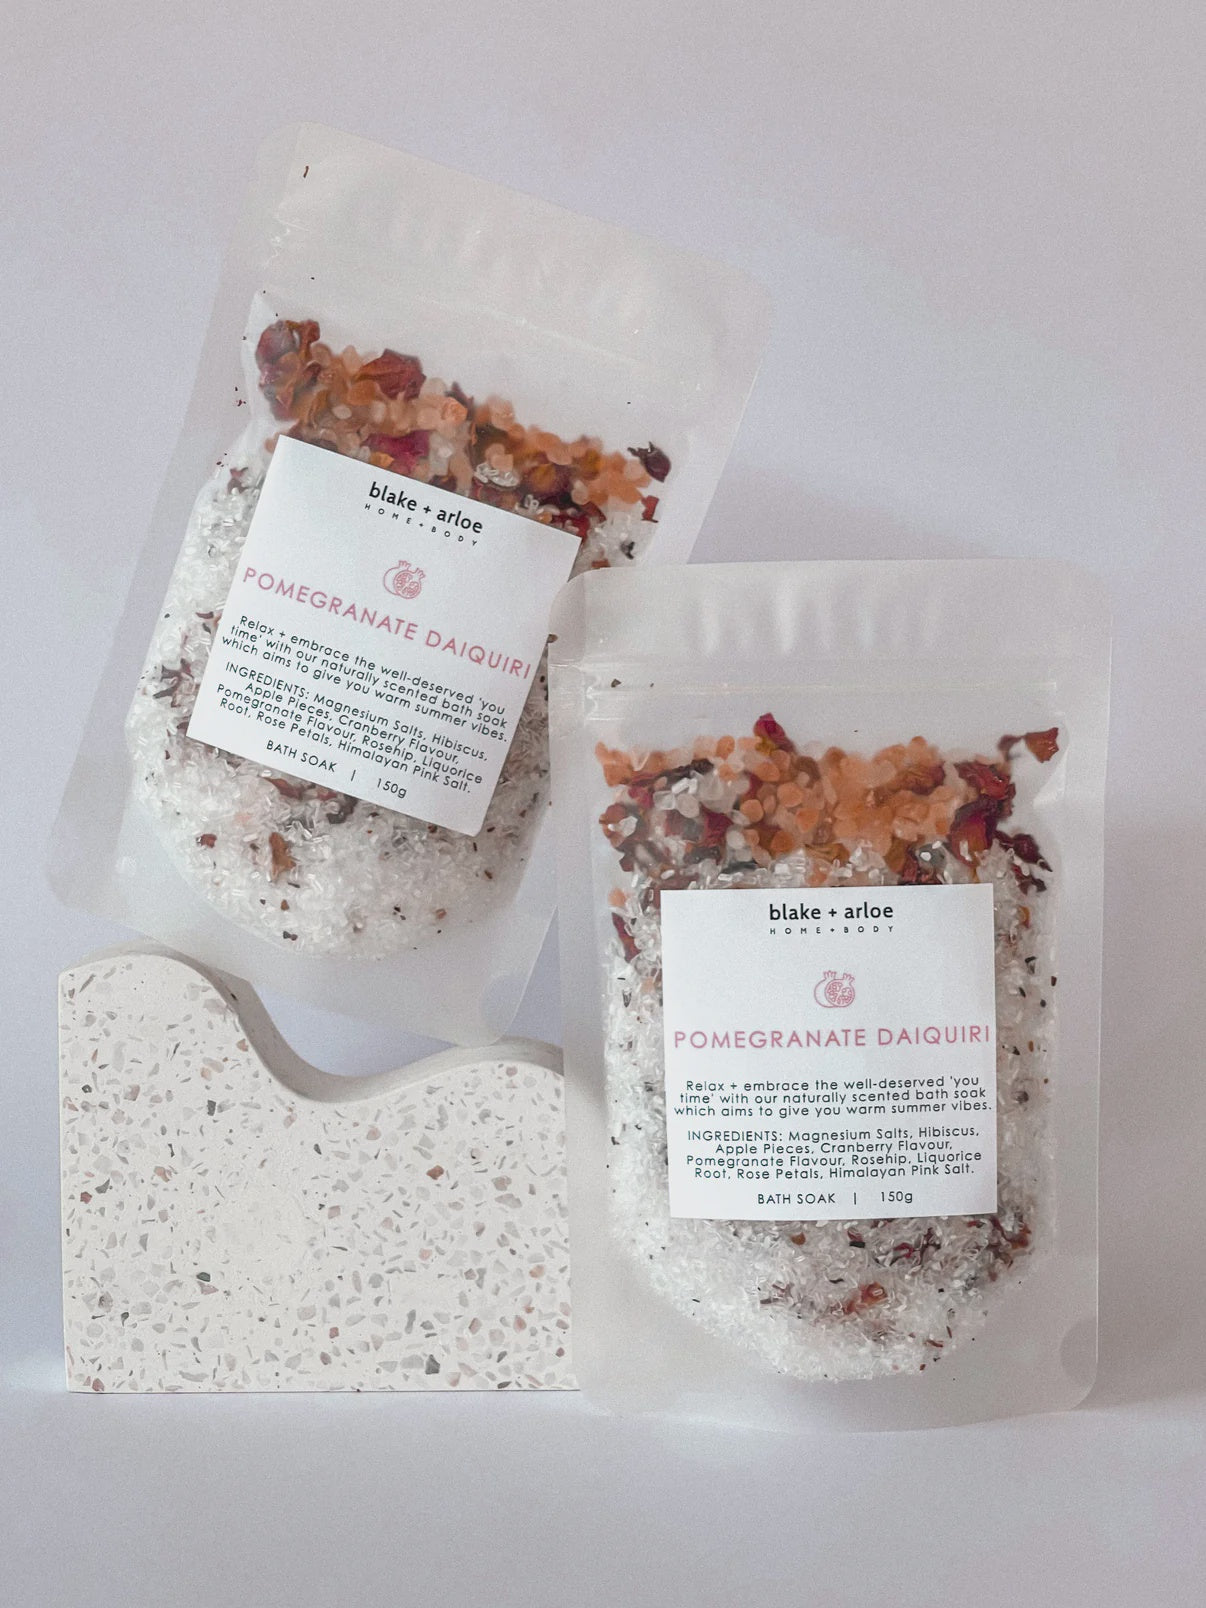 Indulge in a deliciously scented bath with our Pomegranate Daiquiri bath soak! Made with natural ingredients, this 150g soak will leave you feeling refreshed and rejuvenated. Time to soak up some fruity goodness!